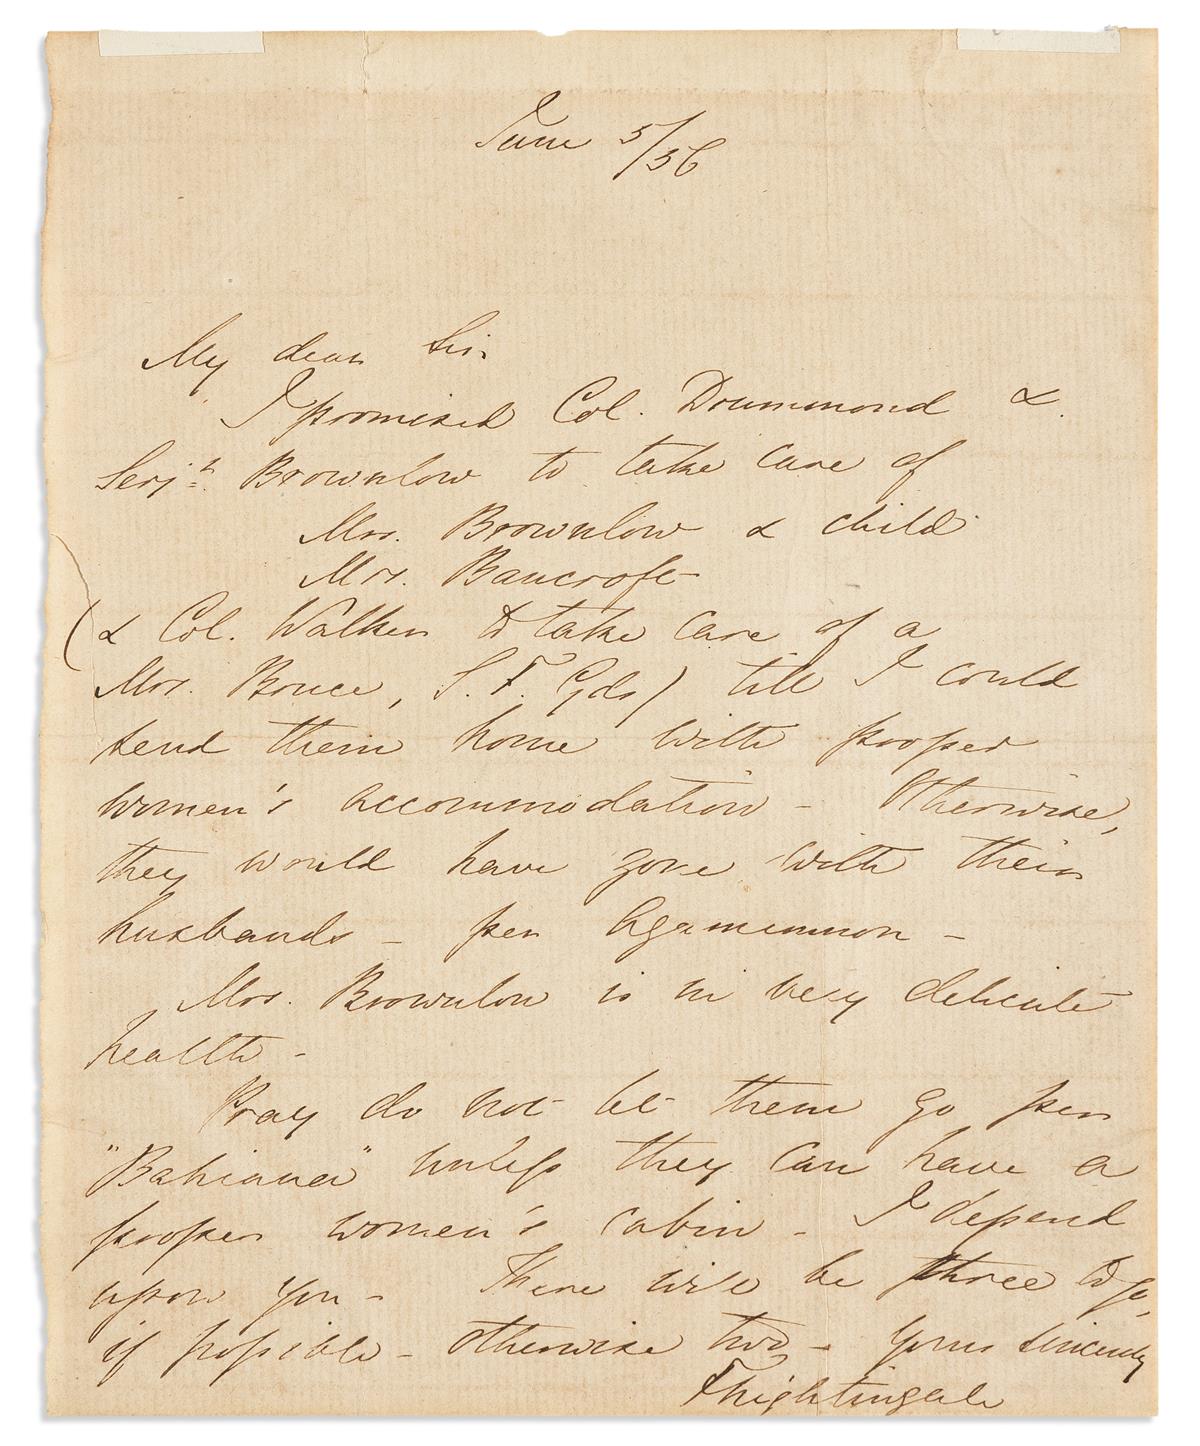 NIGHTINGALE, FLORENCE. Autograph Letter Signed, FNightingale, to My dear Sir,